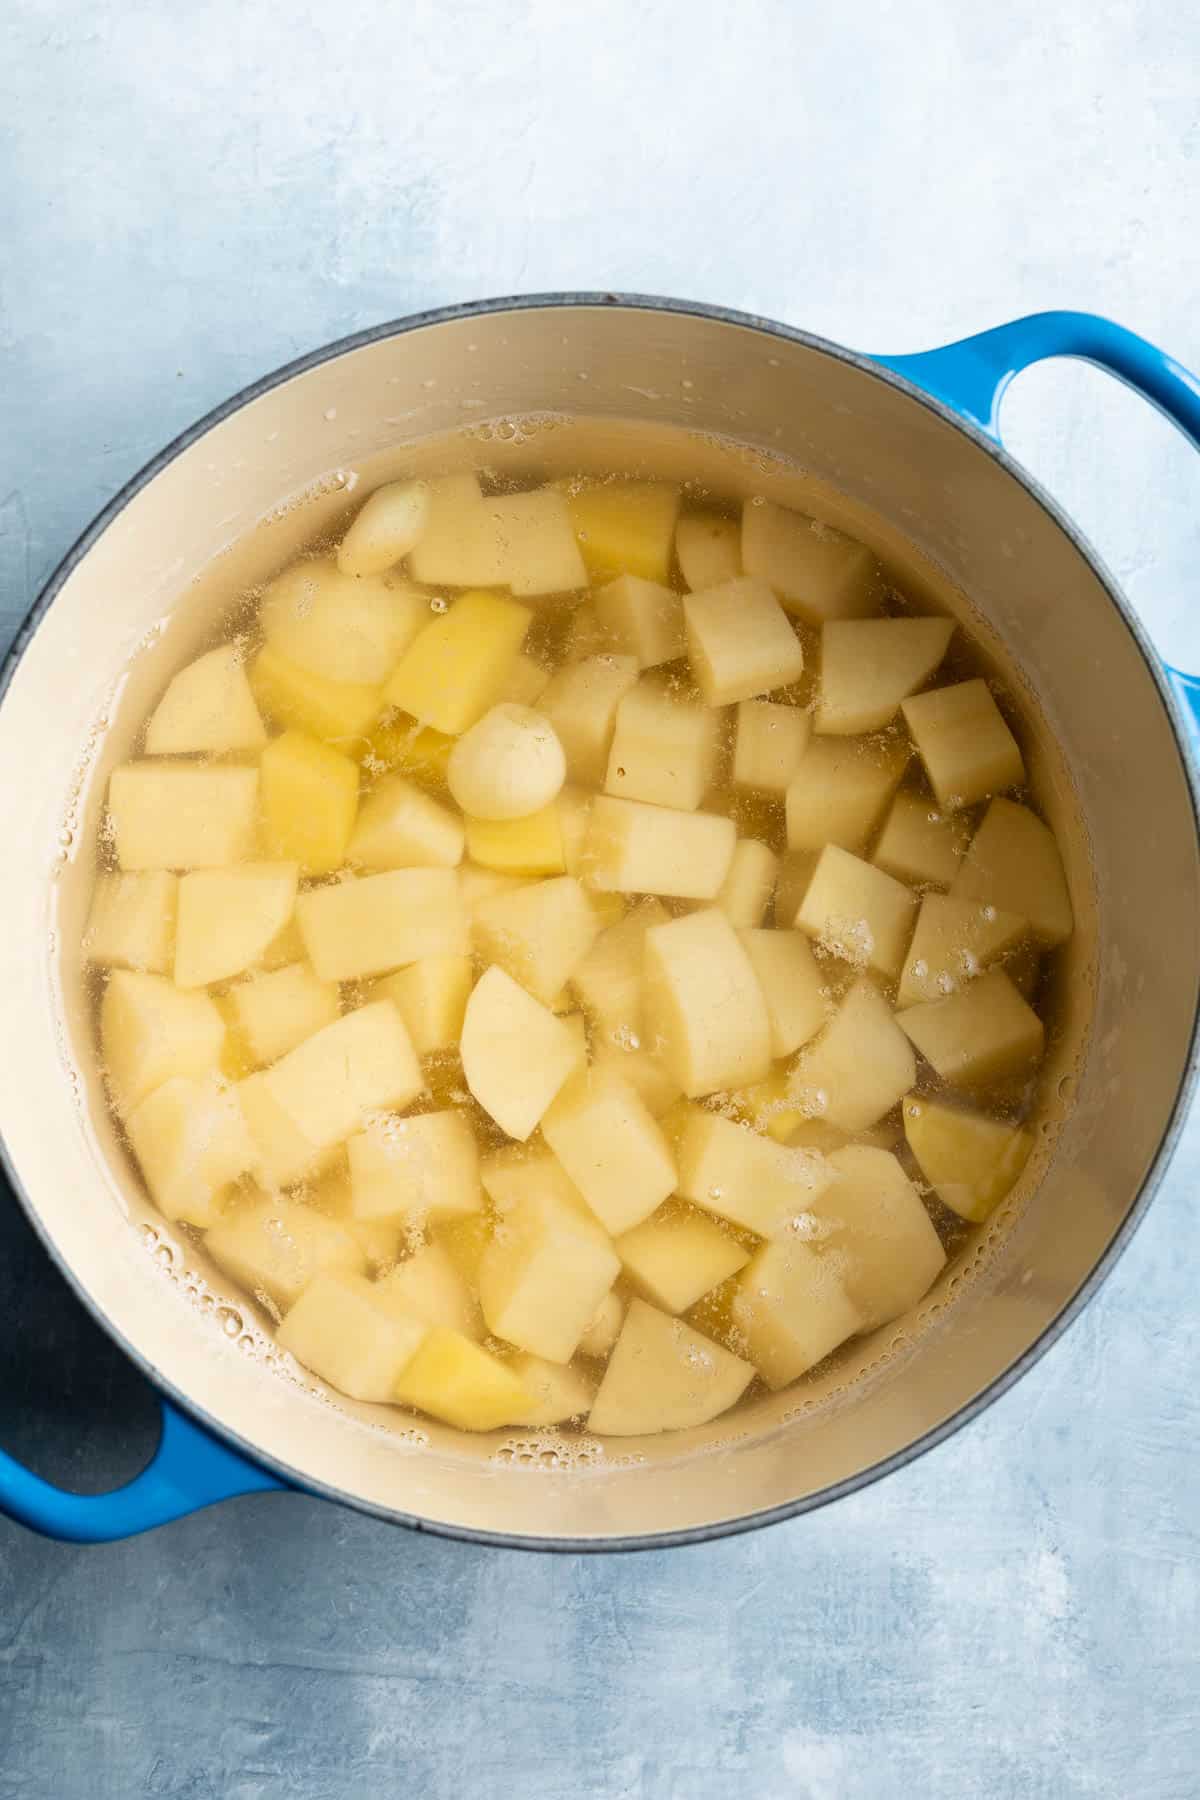 Potato chunks and garlic in a water-filled pot.